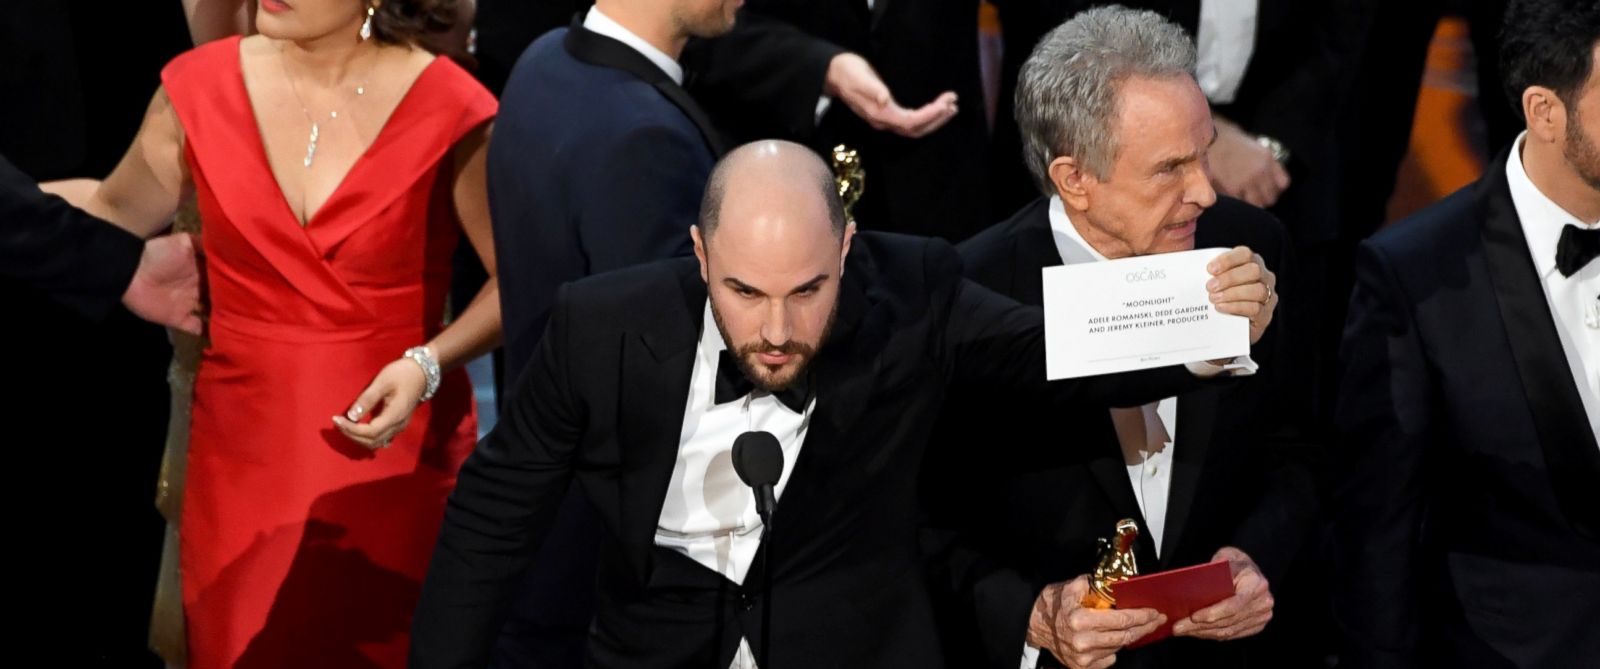 GTY-oscars-best-picture-01-as-170226_12x5_1600